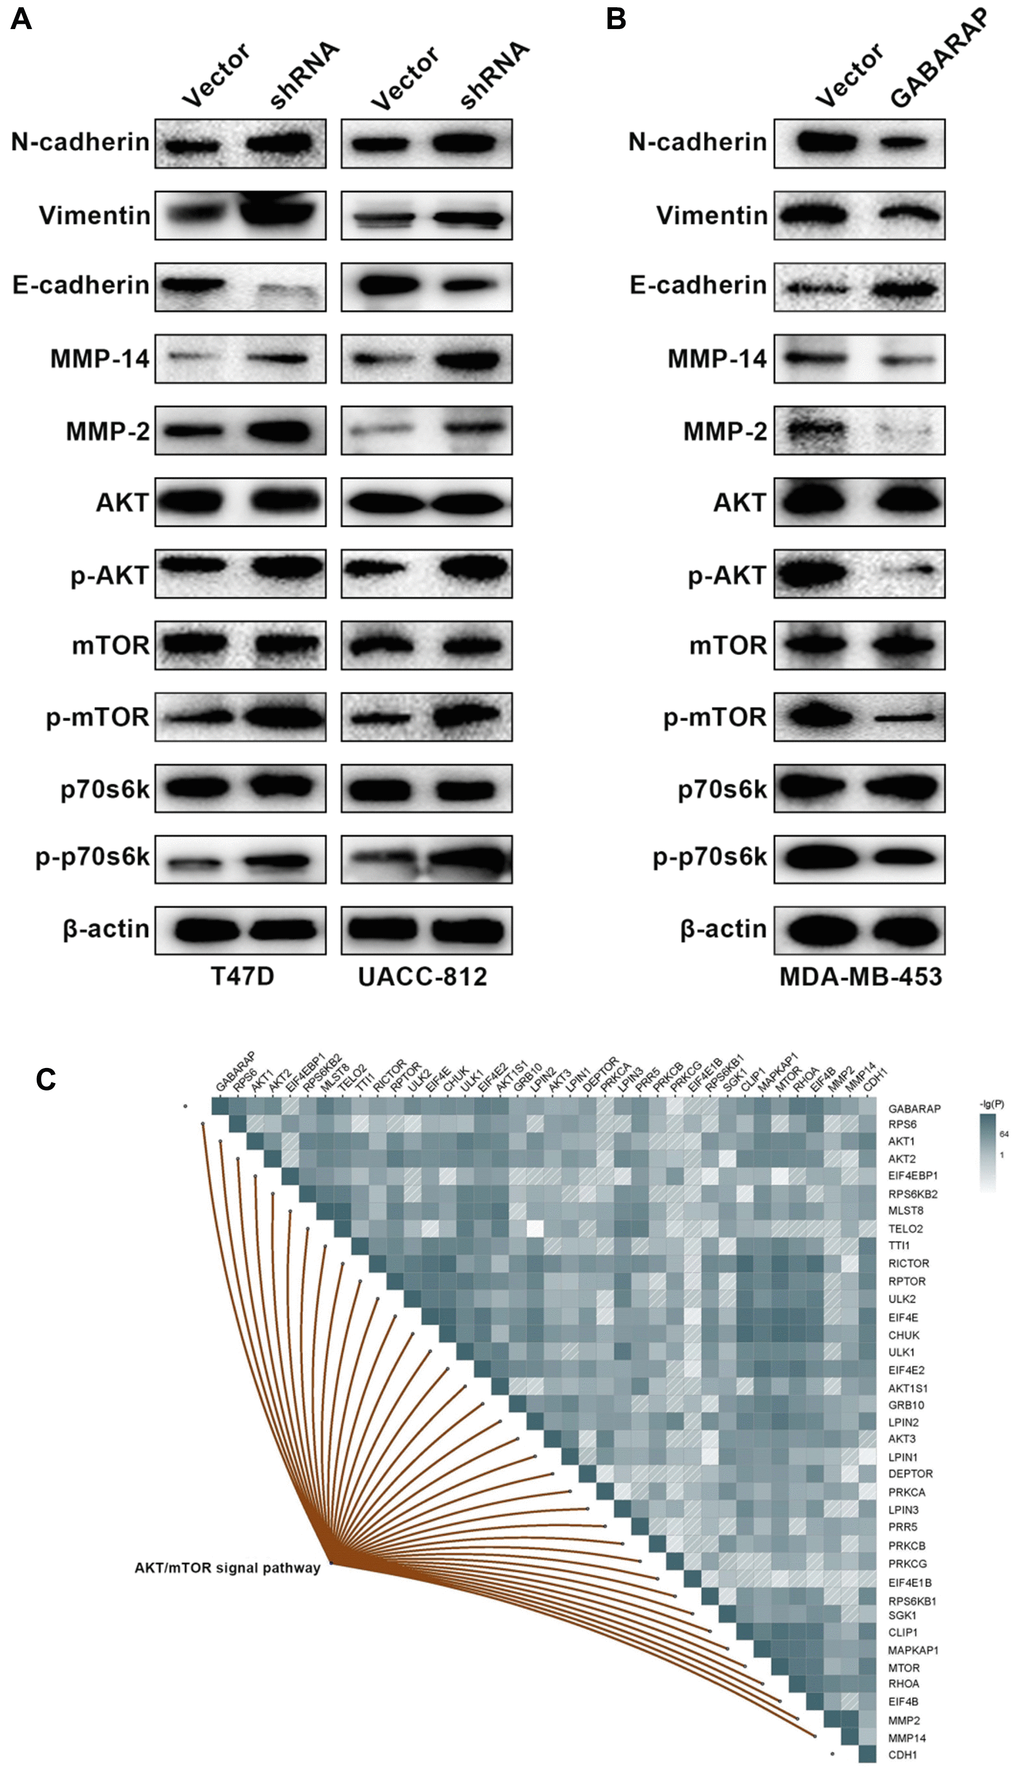 Low GABARAP level promotes cellular EMT via AKT/mTOR signaling in breast cancer. (A) Western blot analyses were used to detect the expression levels of E-cadherin, N-cadherin, vimentin, MMP2, MMP14, p-AKT, AKT, p-mTOR, mTOR, p-p70s6k and p70s6k in T47D-vector, T47D-shRNA, UACC-812-vector and UACC-812-shRNA cells. Cells were lysed using RIPA lysis buffer containing protease inhibitors and a phosphorylase inhibitor cocktail to obtain protein. β-actin was used as an internal control. (B) Western blot analyses were used to detect the expression levels of E-cadherin, N-cadherin, vimentin, MMP2, MMP14, p-AKT, AKT, p-mTOR, mTOR, p-p70s6k and p70s6k in MDA-MB-453-vector and MDA-MB-453-GABARAP cells. Cells were lysed using RIPA lysis buffer containing protease inhibitors and a phosphorylase inhibitor cocktail to obtain protein. β-actin was used as an internal control. (C) Pearson correlation was calculated among genes related to GABARAP, CDH1, MMP2, MMP14 and the AKT/ mTOR signaling pathway in breast cancer patients clinical cohort (TCGA).